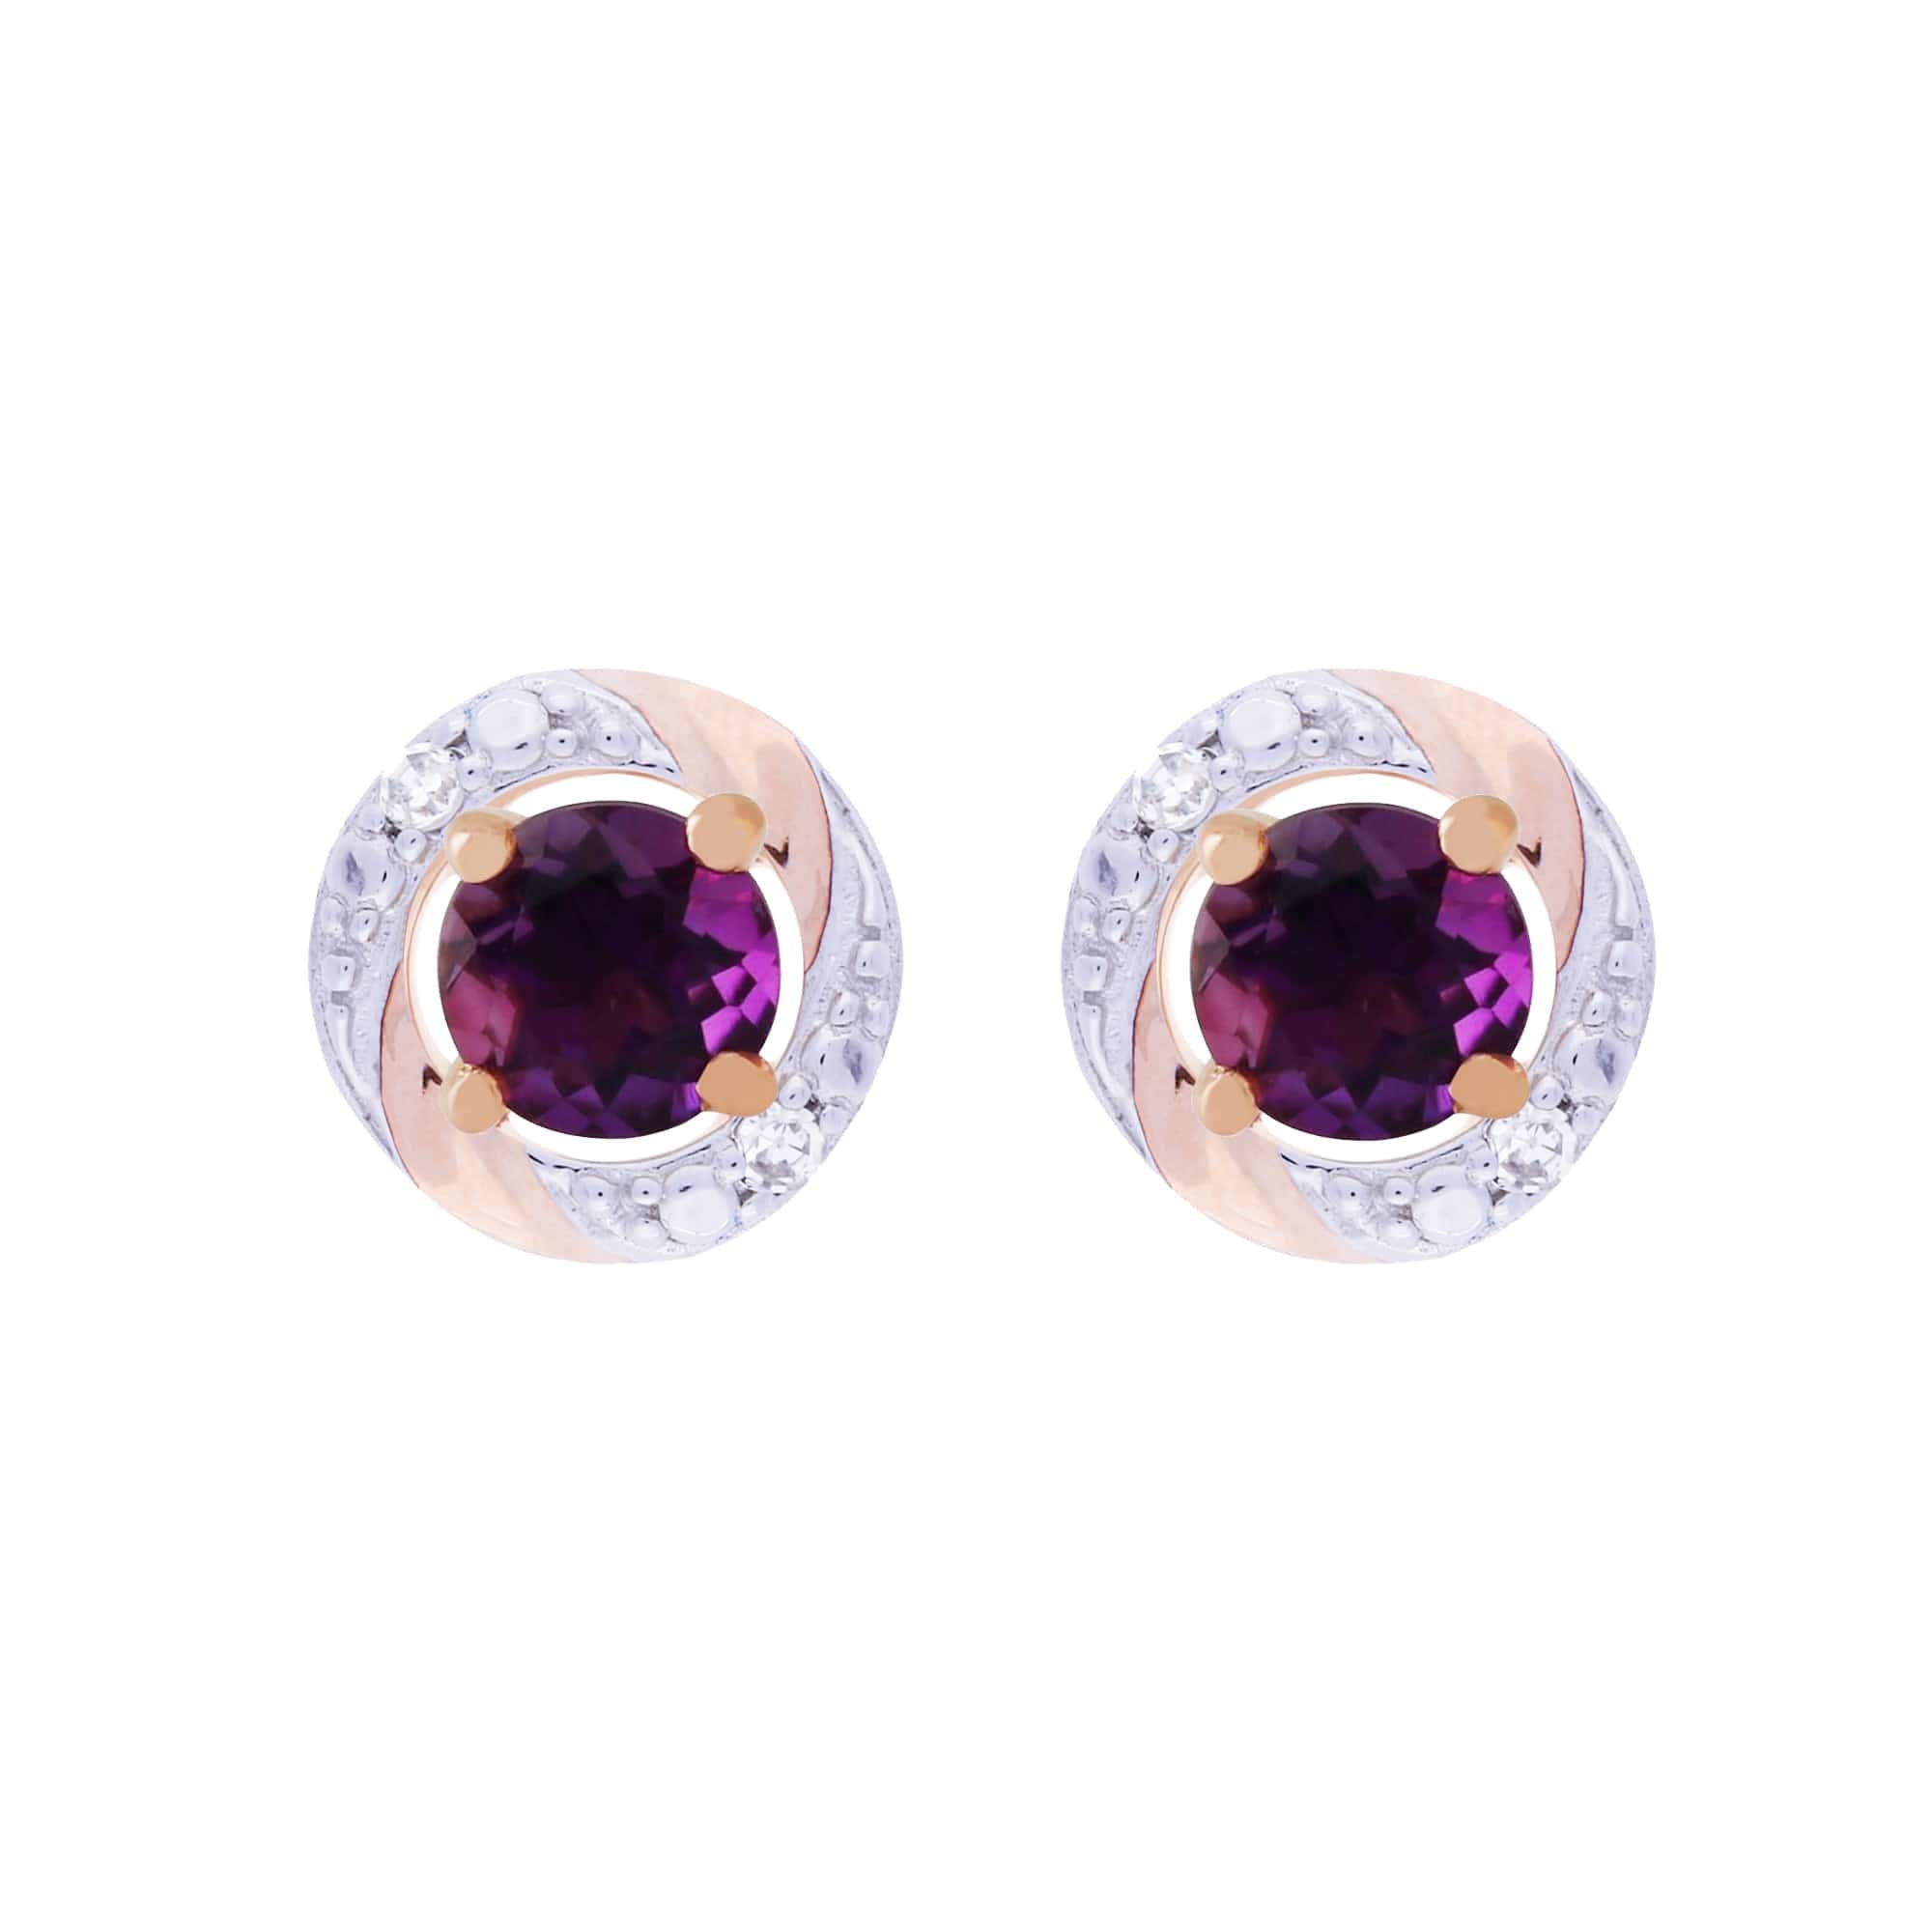 183E4316059-191E0378019 Classic Round Amethyst Stud Earrings with Detachable Diamond Round Earrings Jacket Set in 9ct Rose Gold 1